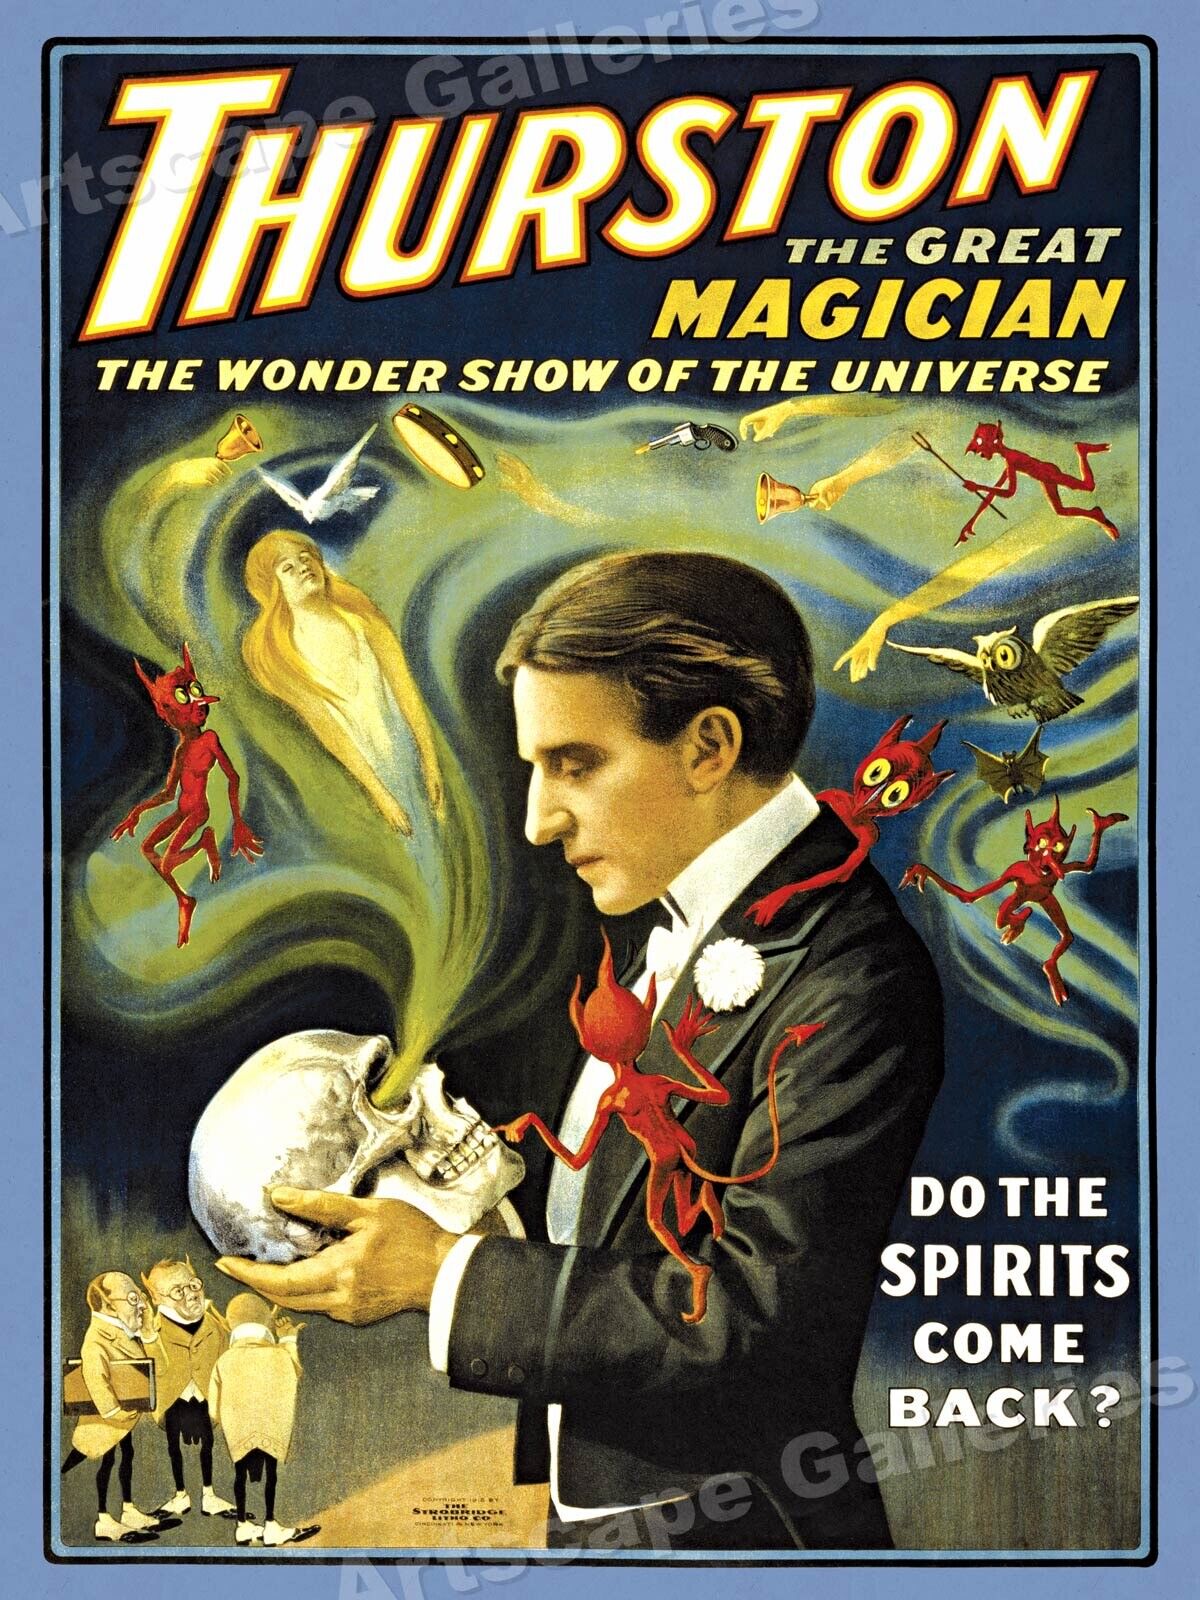 Thurston the Great Magician 1914 Vintage Style Magic Poster - 24x32